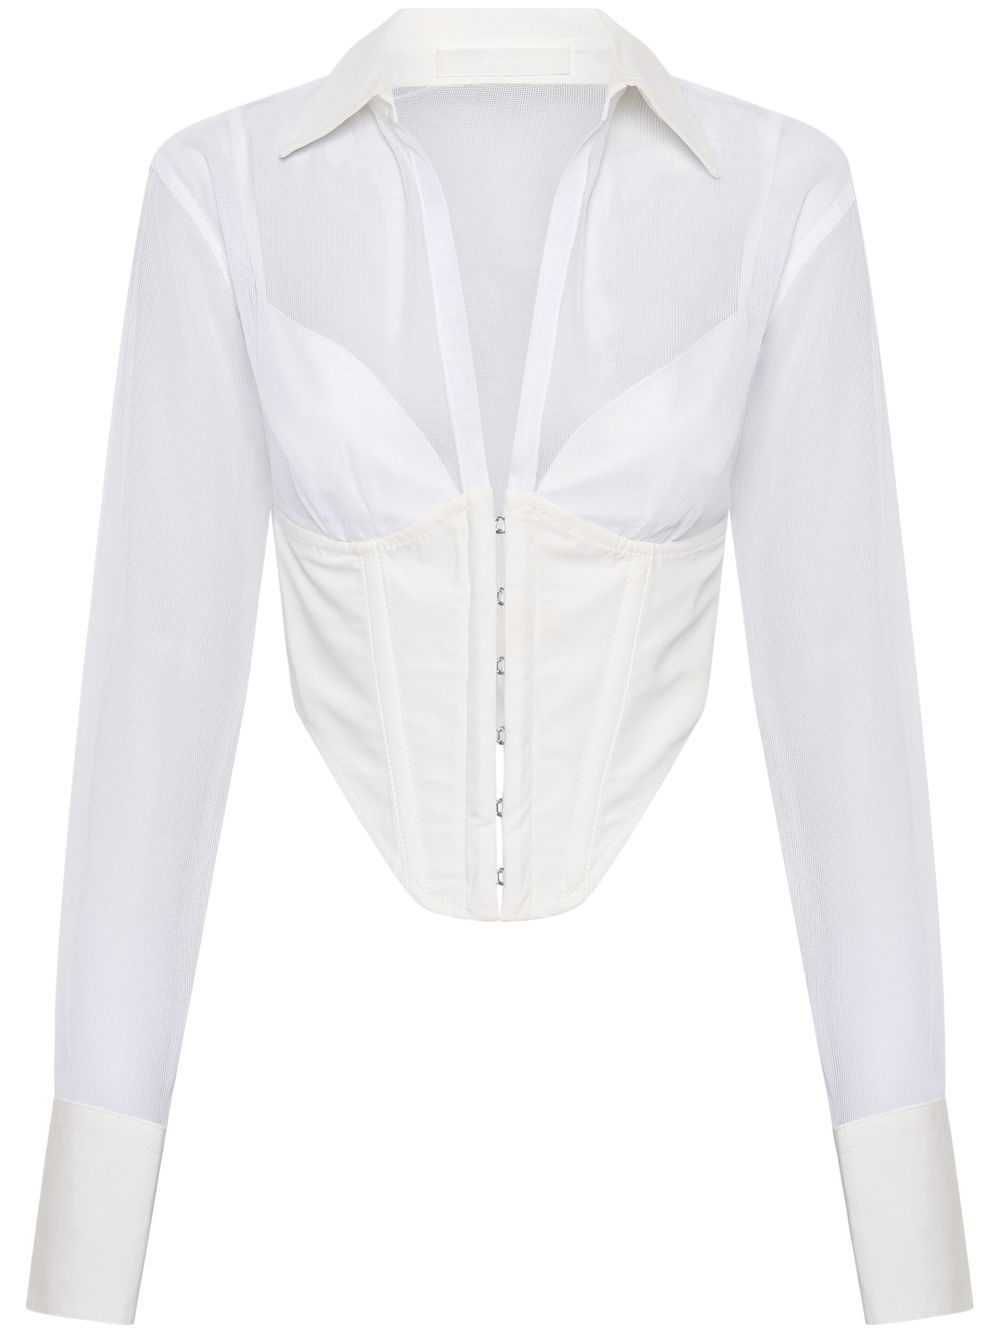 Dion Lee corset-bodice long-sleeve top - White von Dion Lee